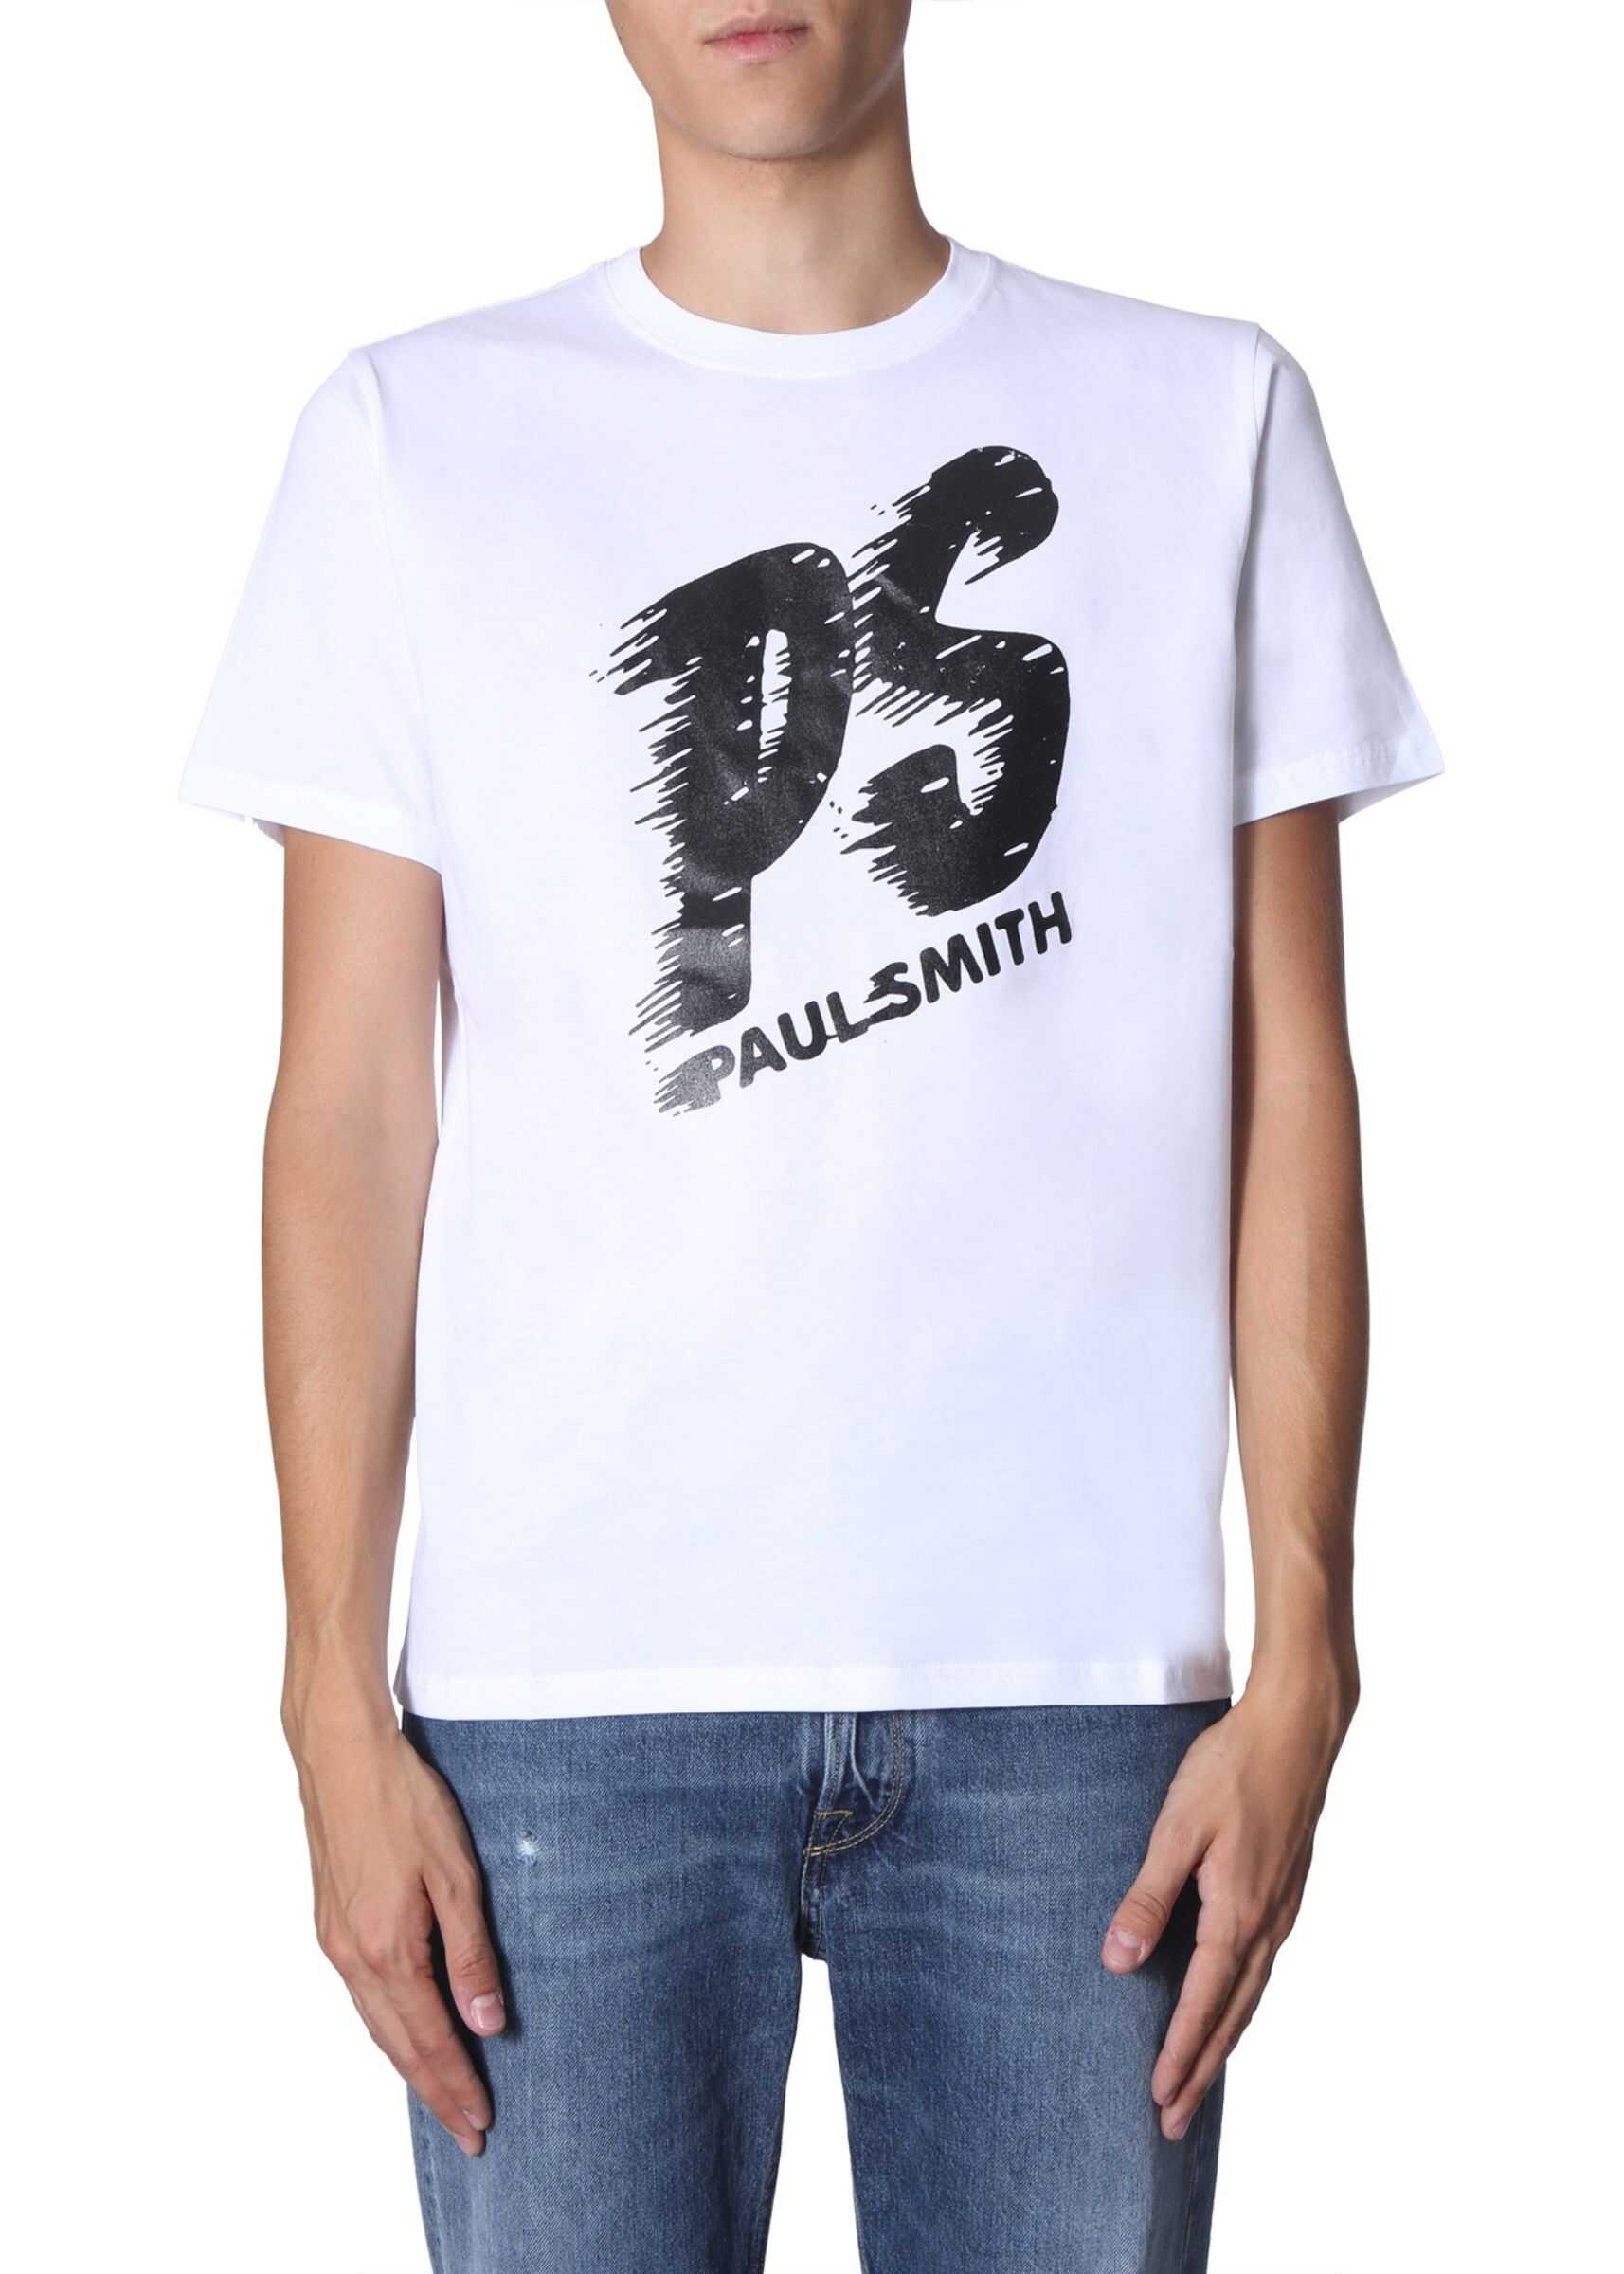 PS by Paul Smith "Ps" T-Shirt WHITE